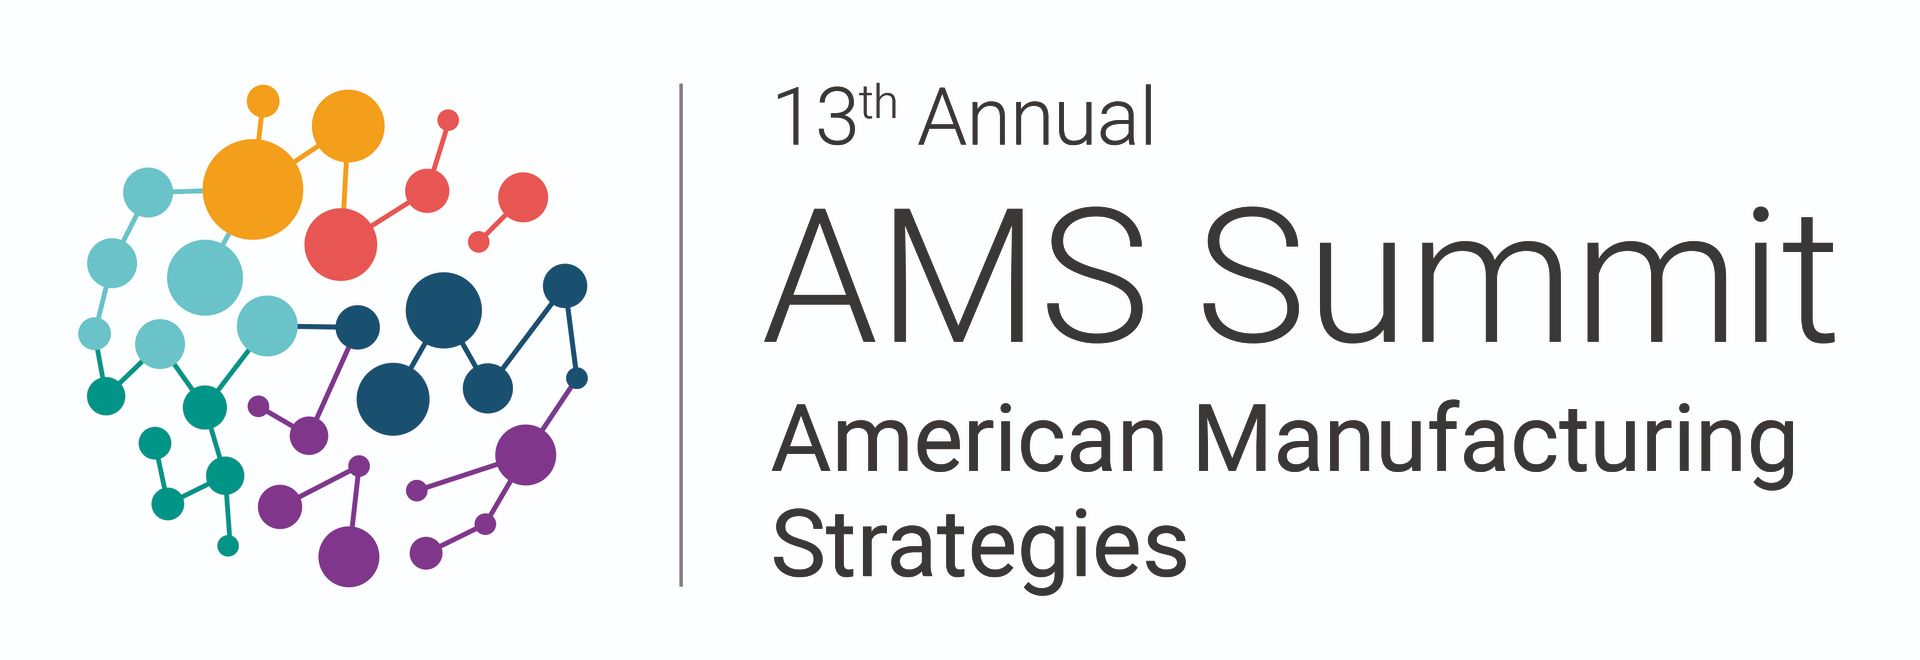 13th Annual American Manufacturing Strategies Summit